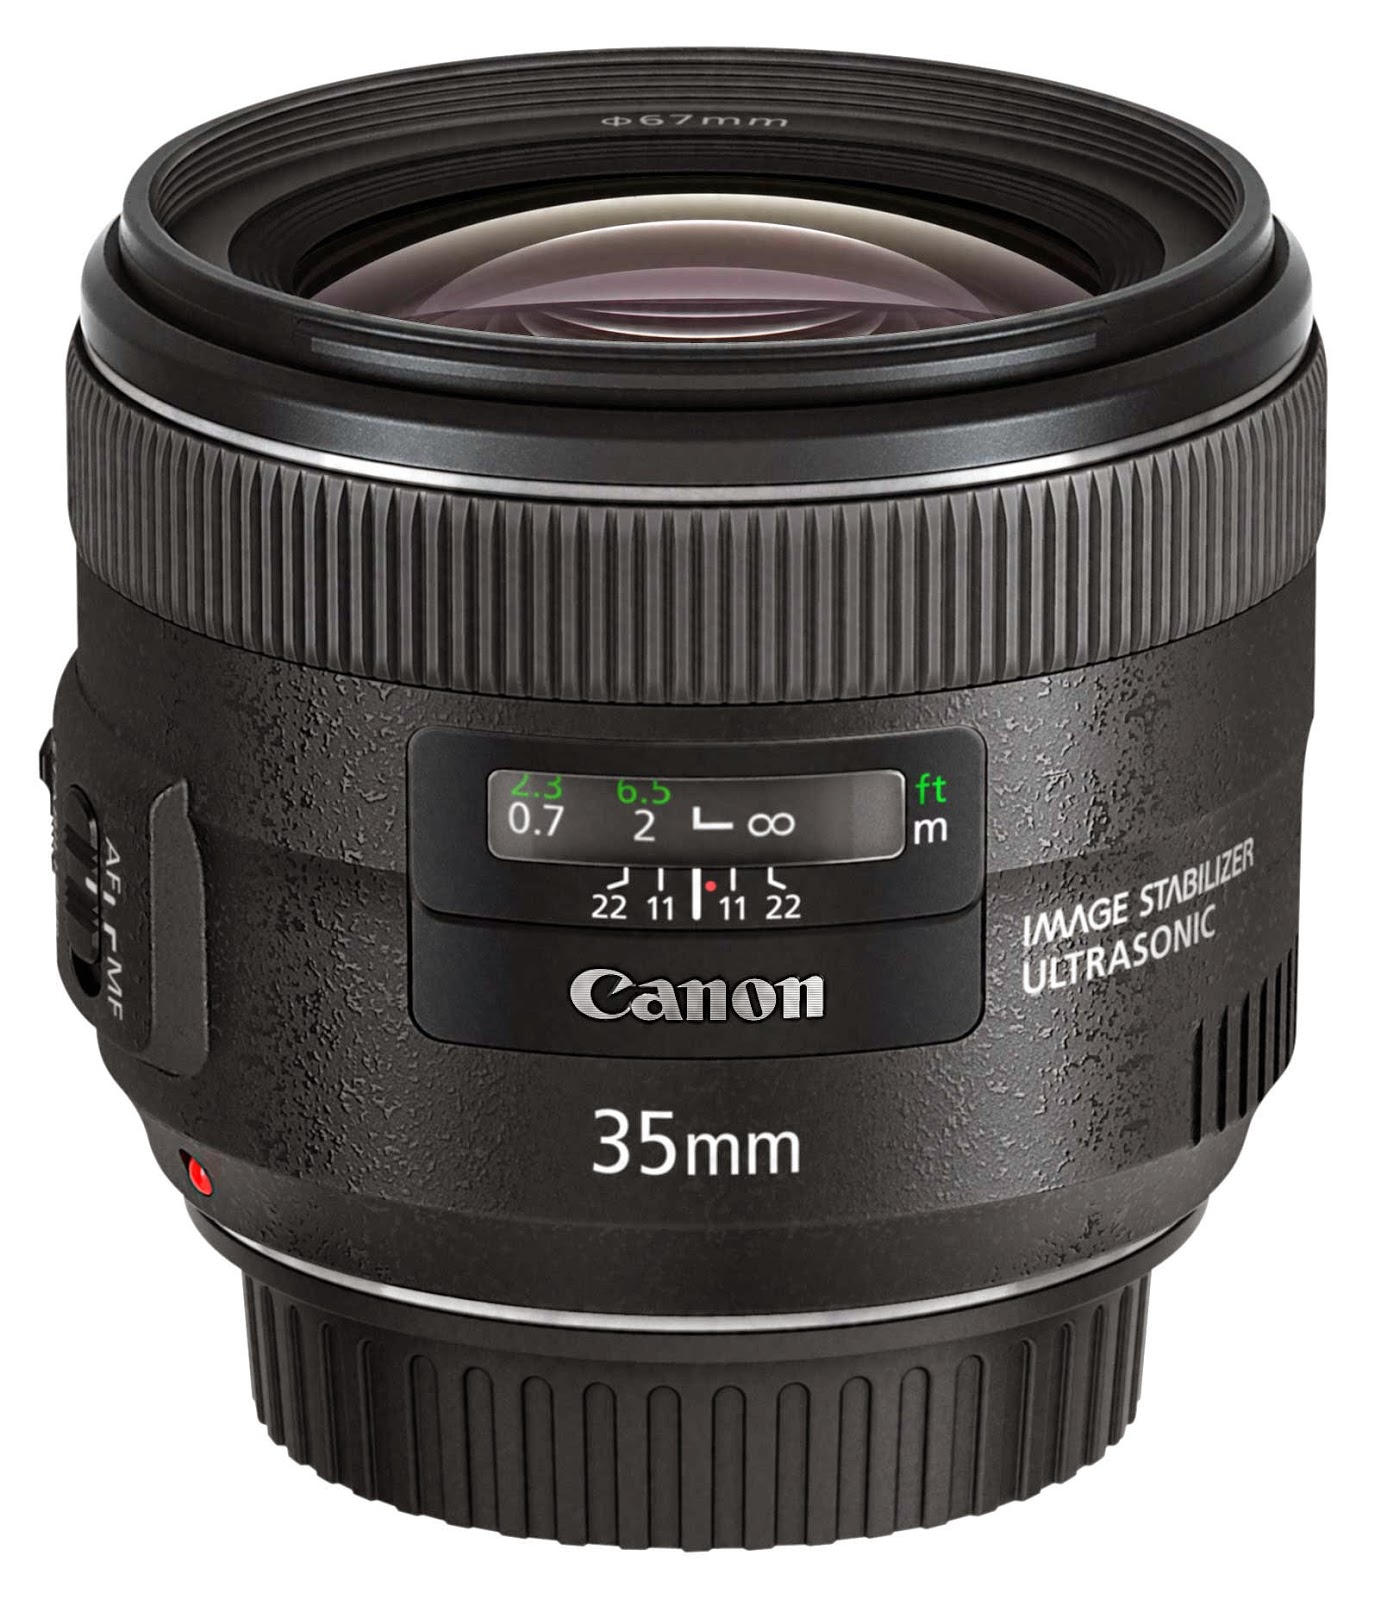 Taking a look at the Canon EF 35mm f/2 IS USM – ideal for shooting hand